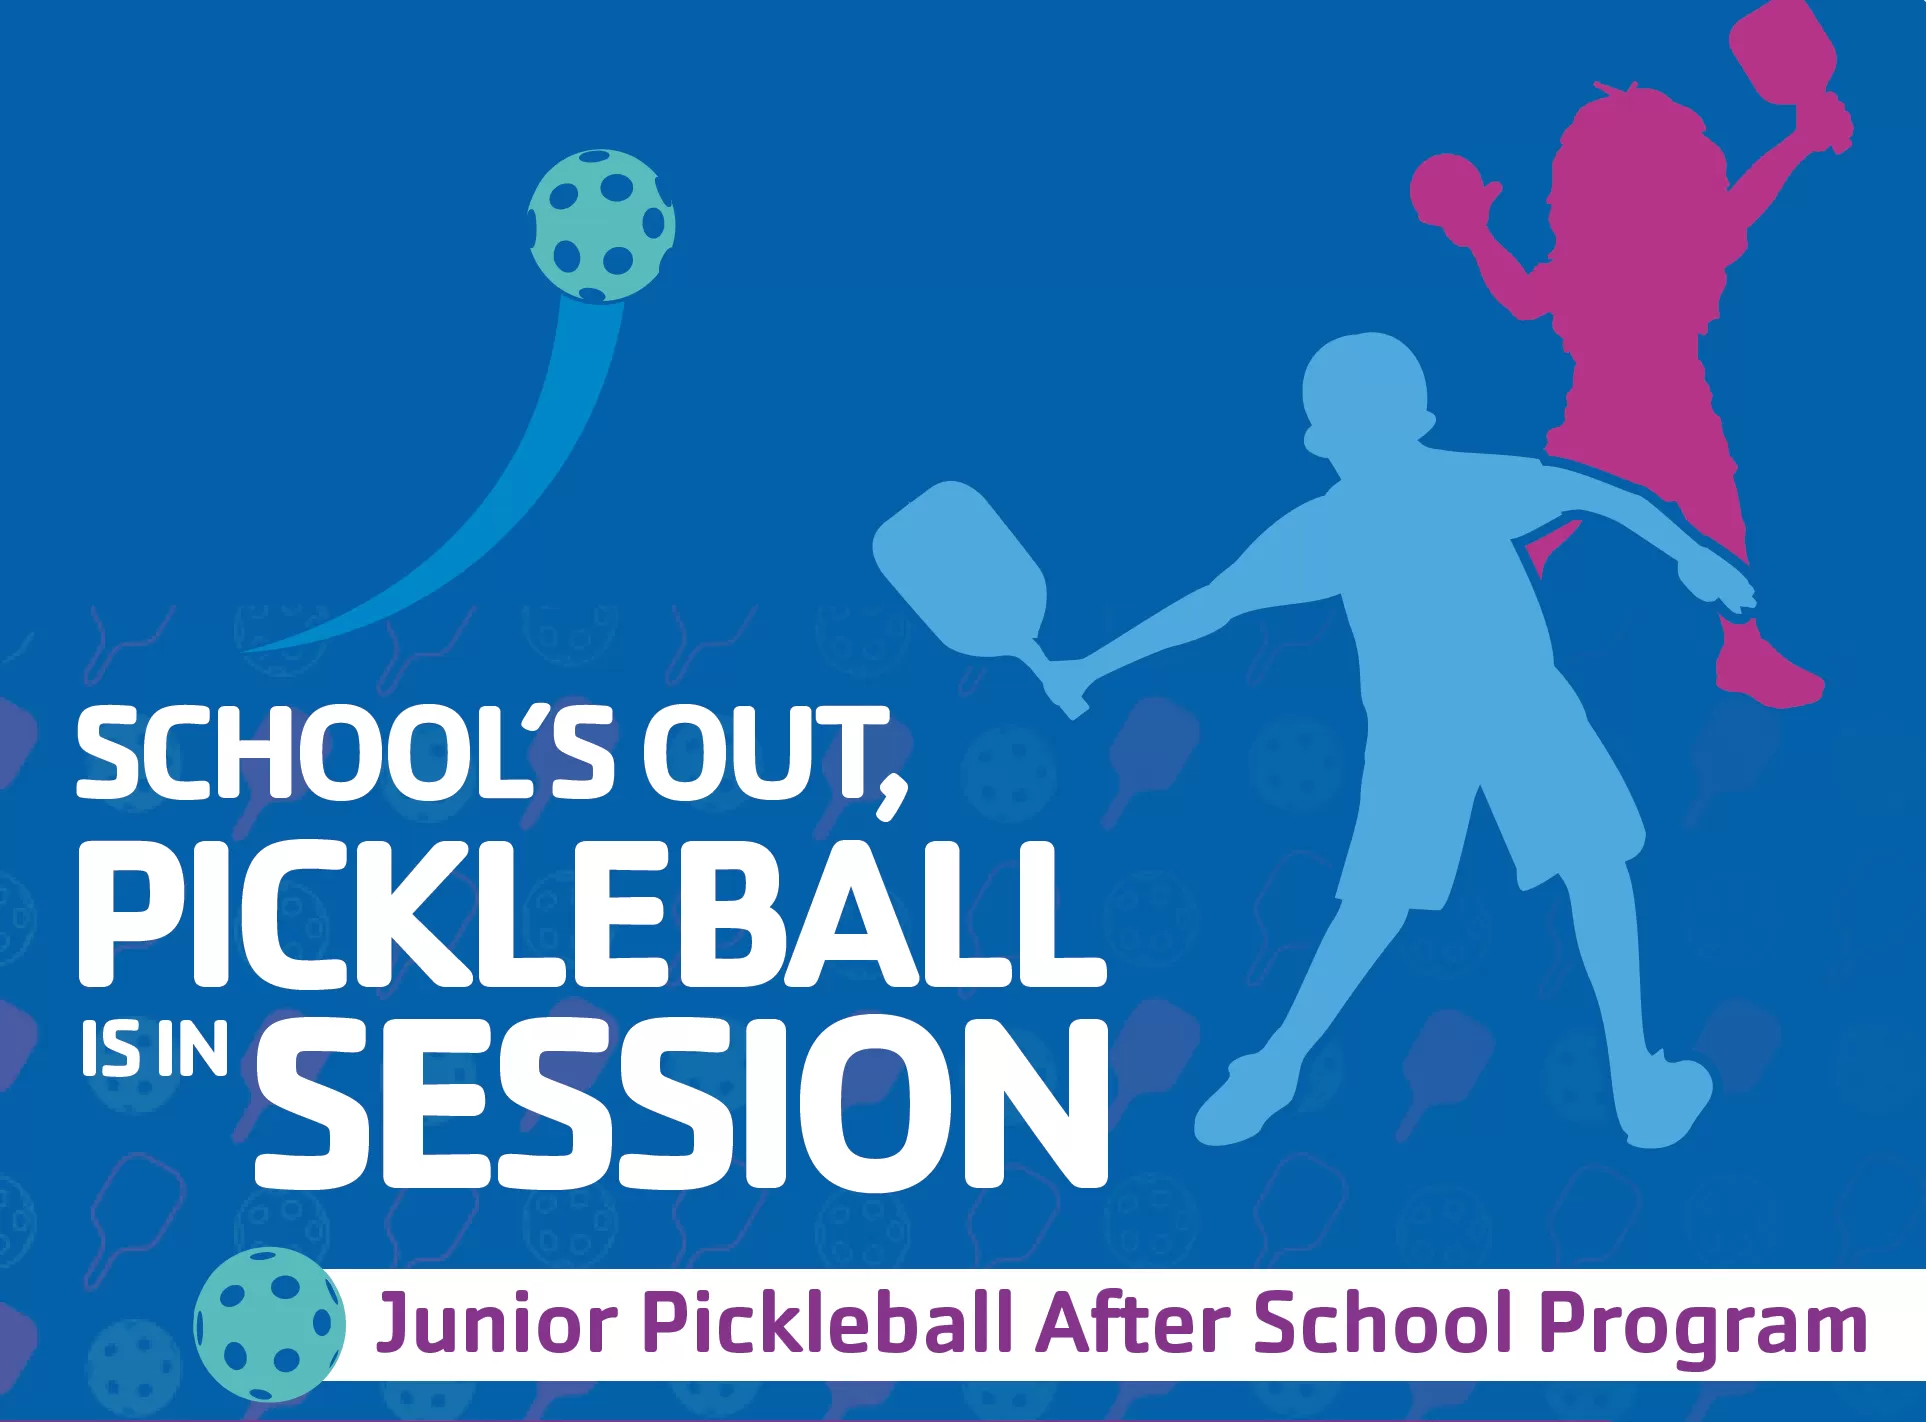 Pickleball is in Session